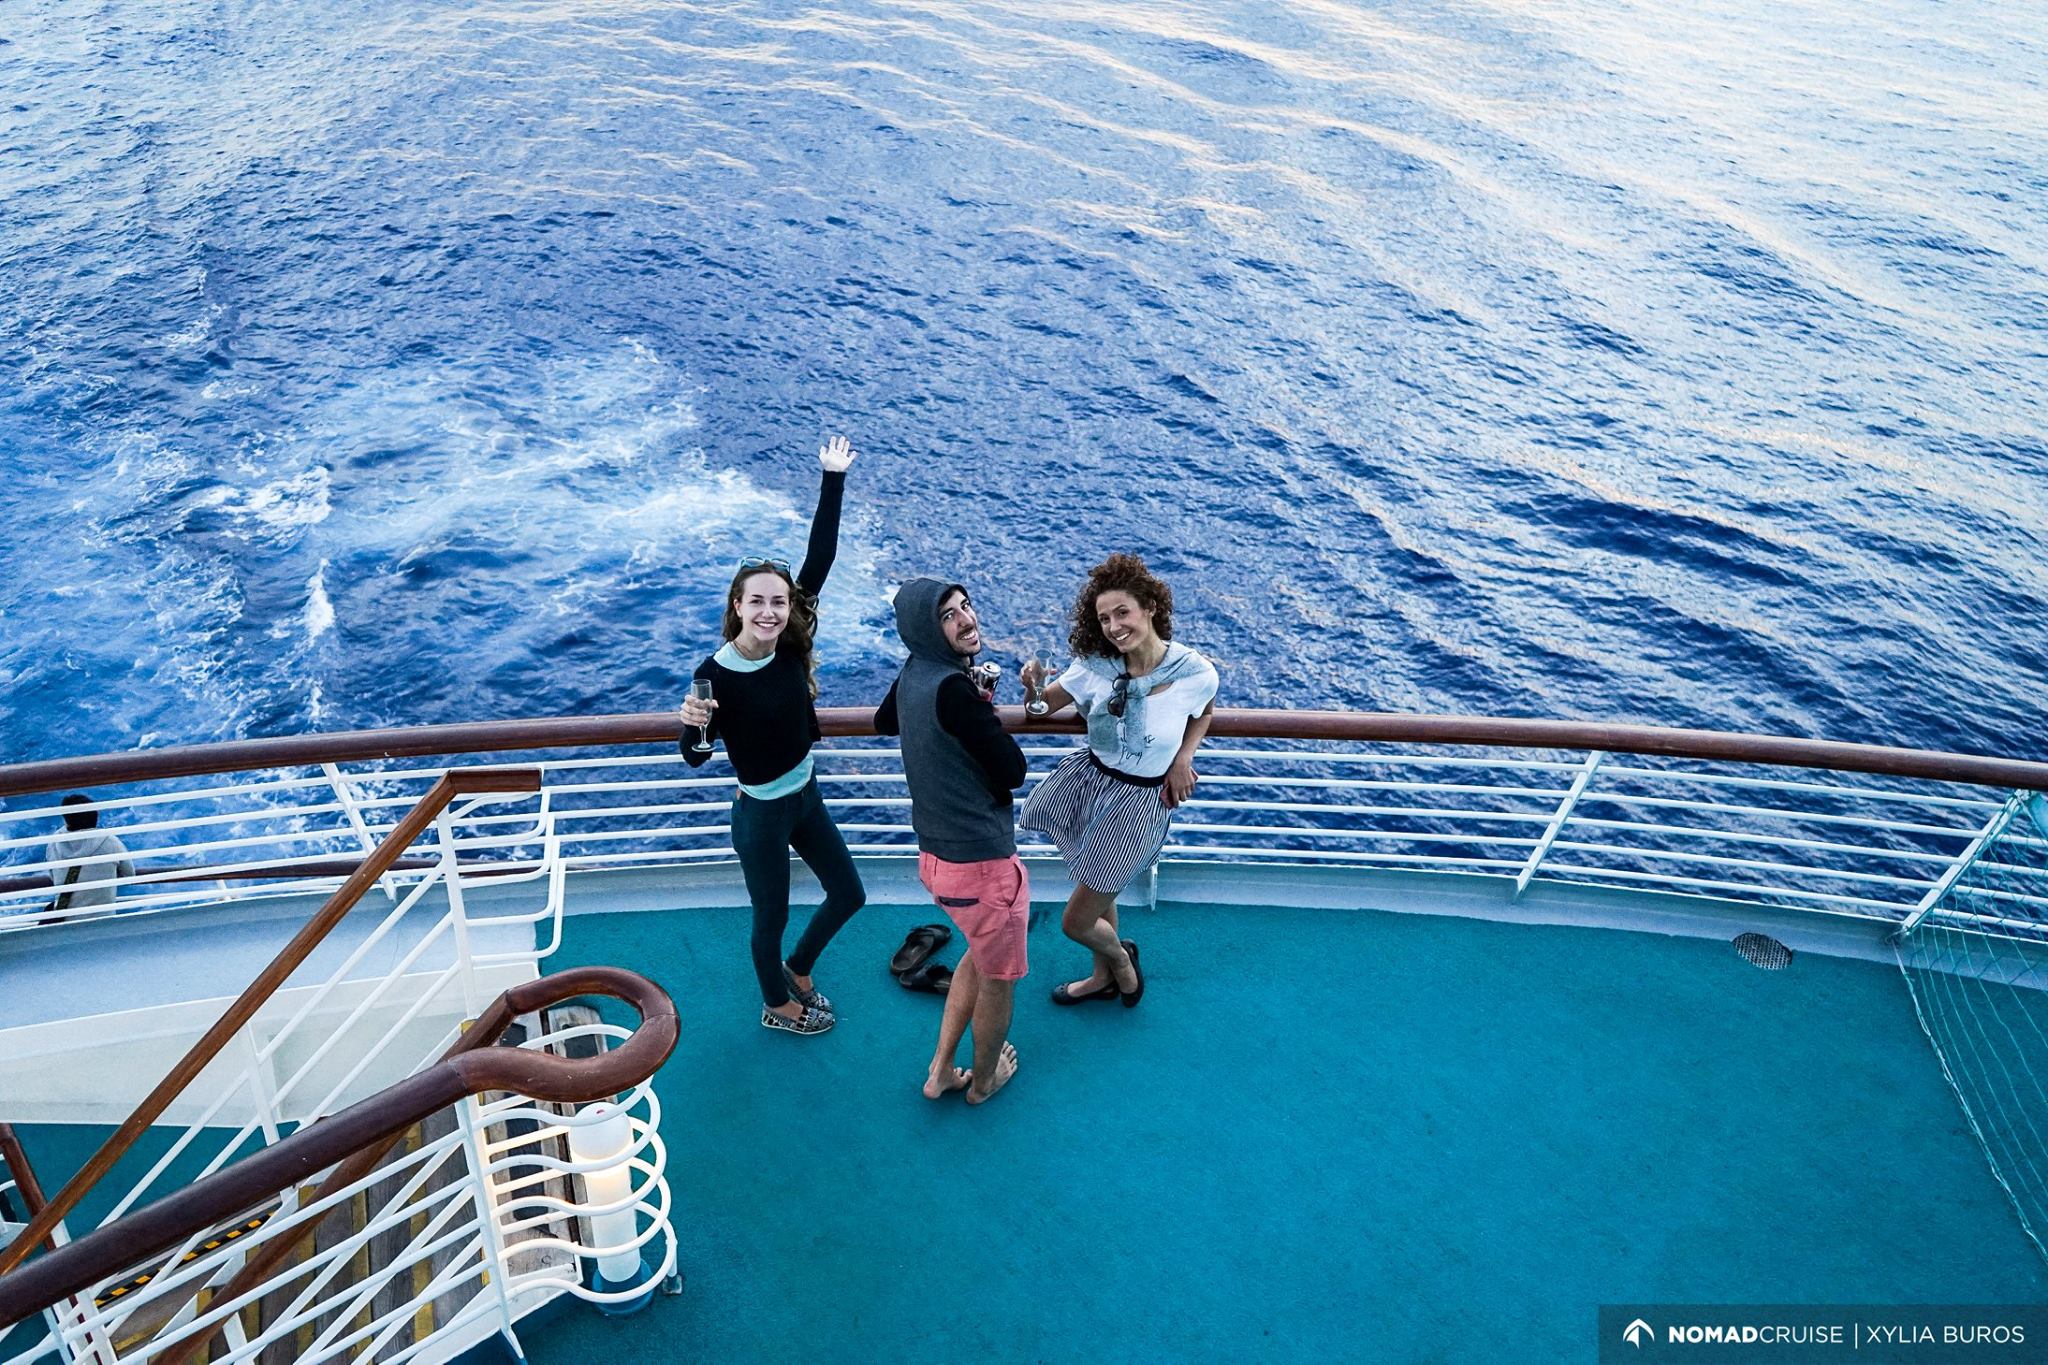 How To Fight Sea Sickness on Nomad Cruise